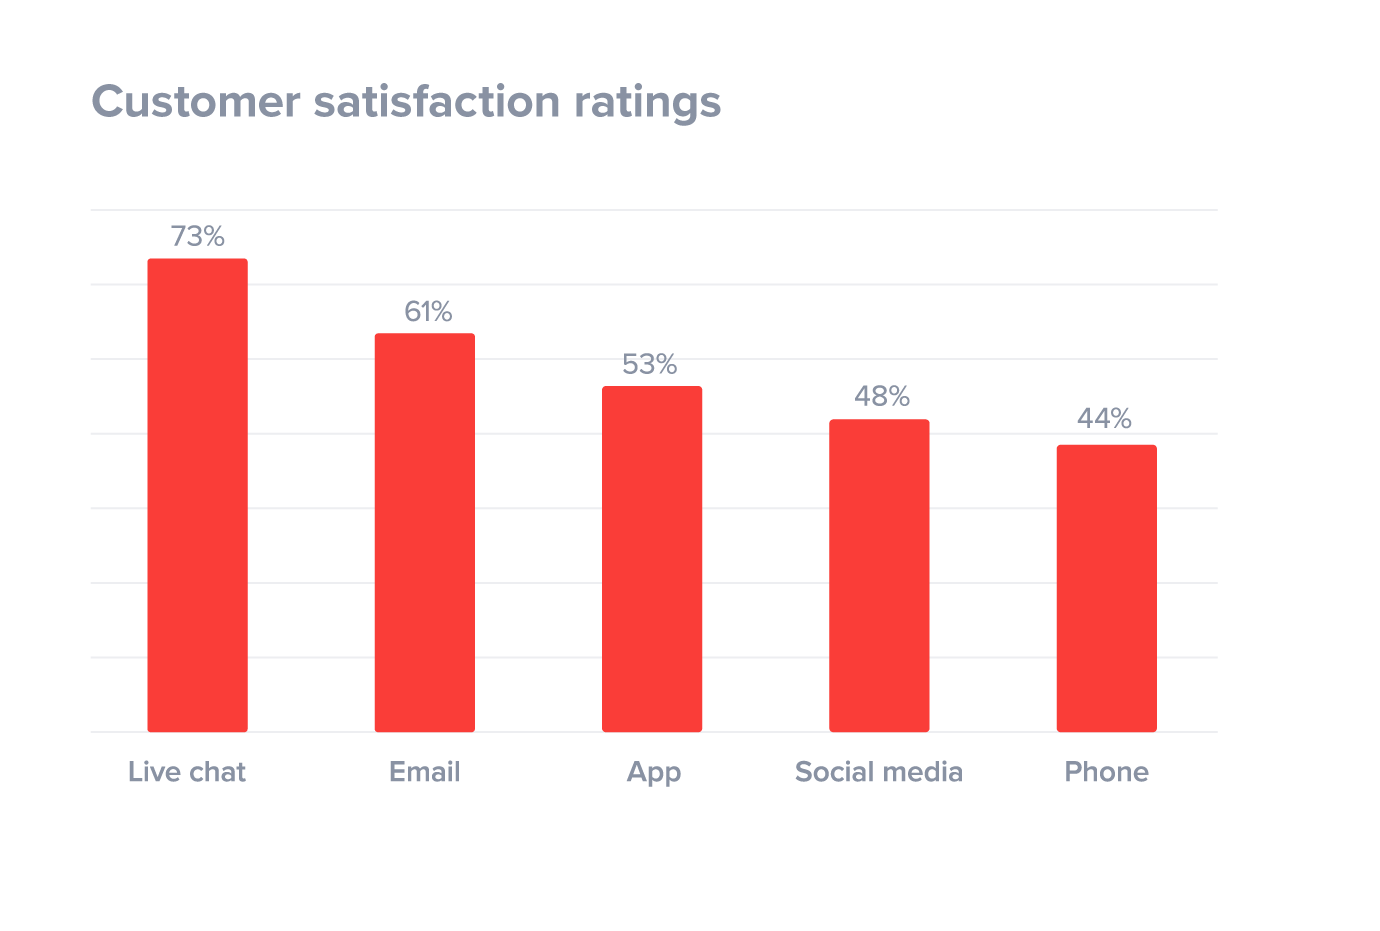 Customer satisfaction ratings, by channel